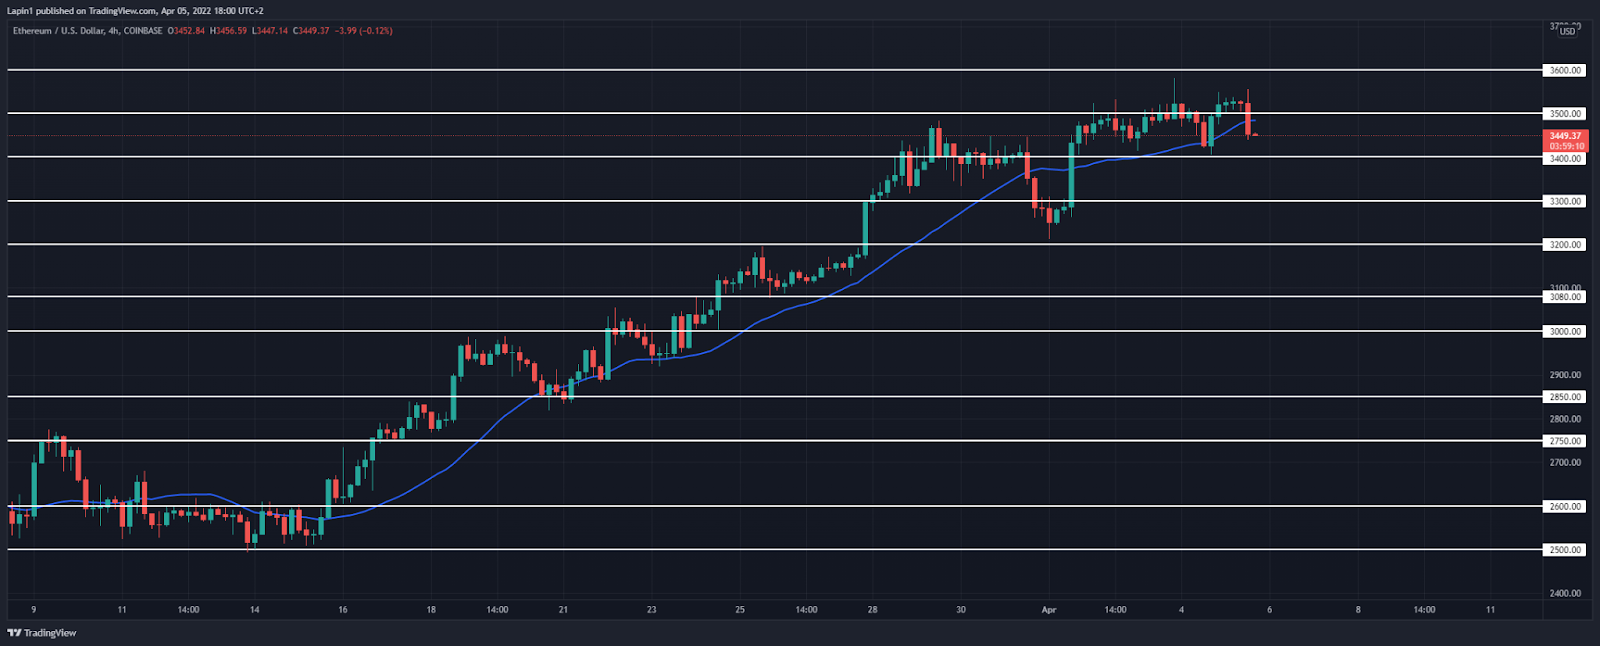 Ethereum price analysis: ETH sets lower high at $3,560, ready to drop further?